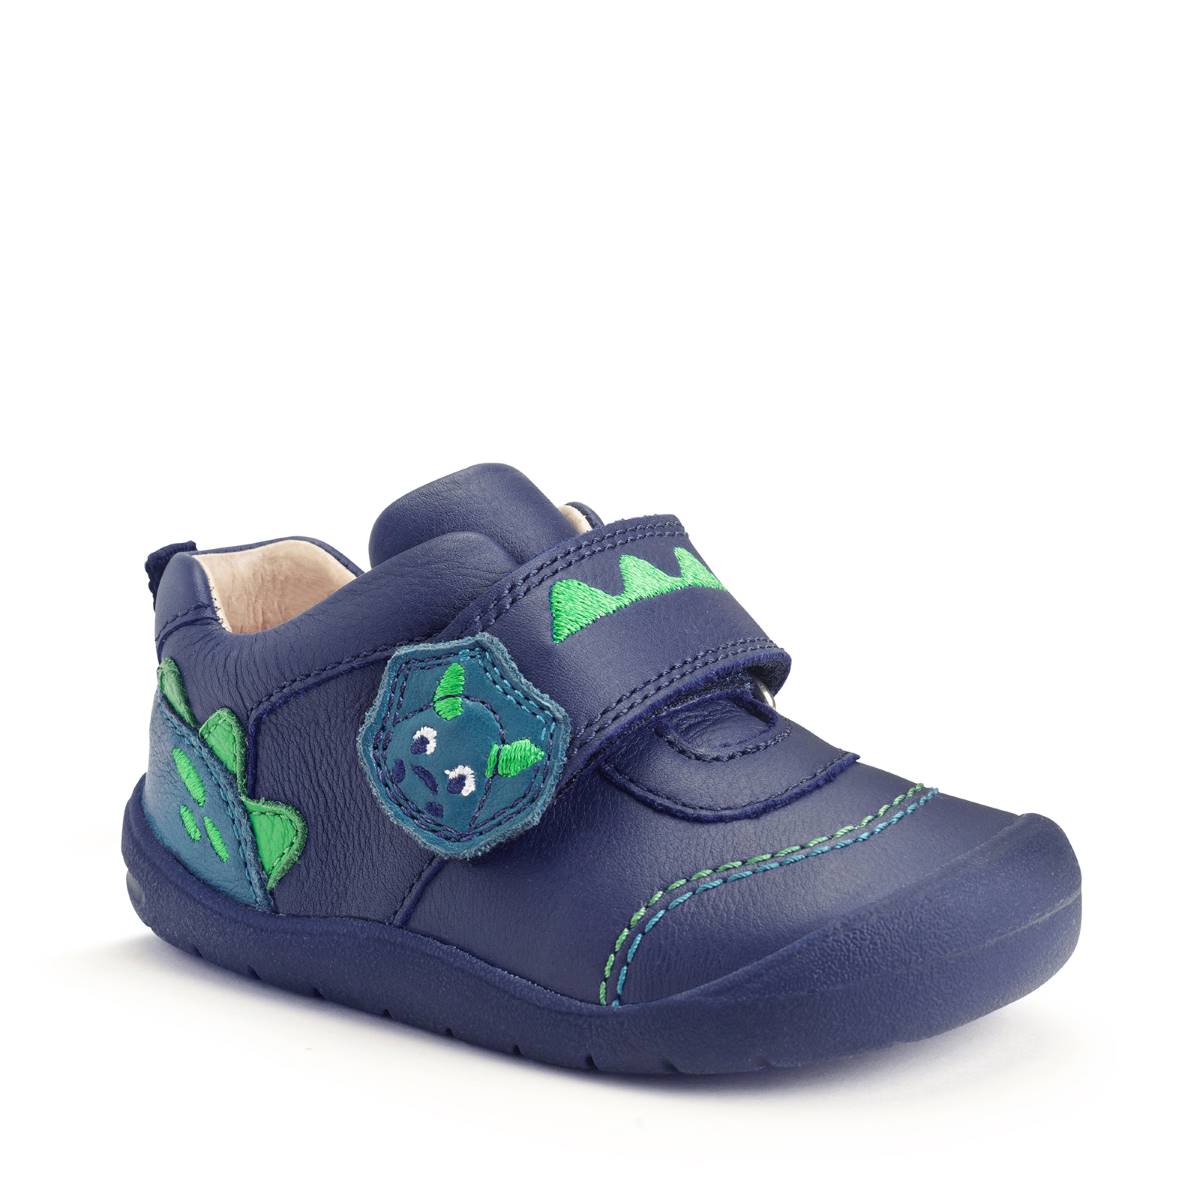 Start Rite Dino Foot 1v BLUE LEATHER Kids Boys Toddler Shoes 0829-96F in a Plain Leather in Size 5.5